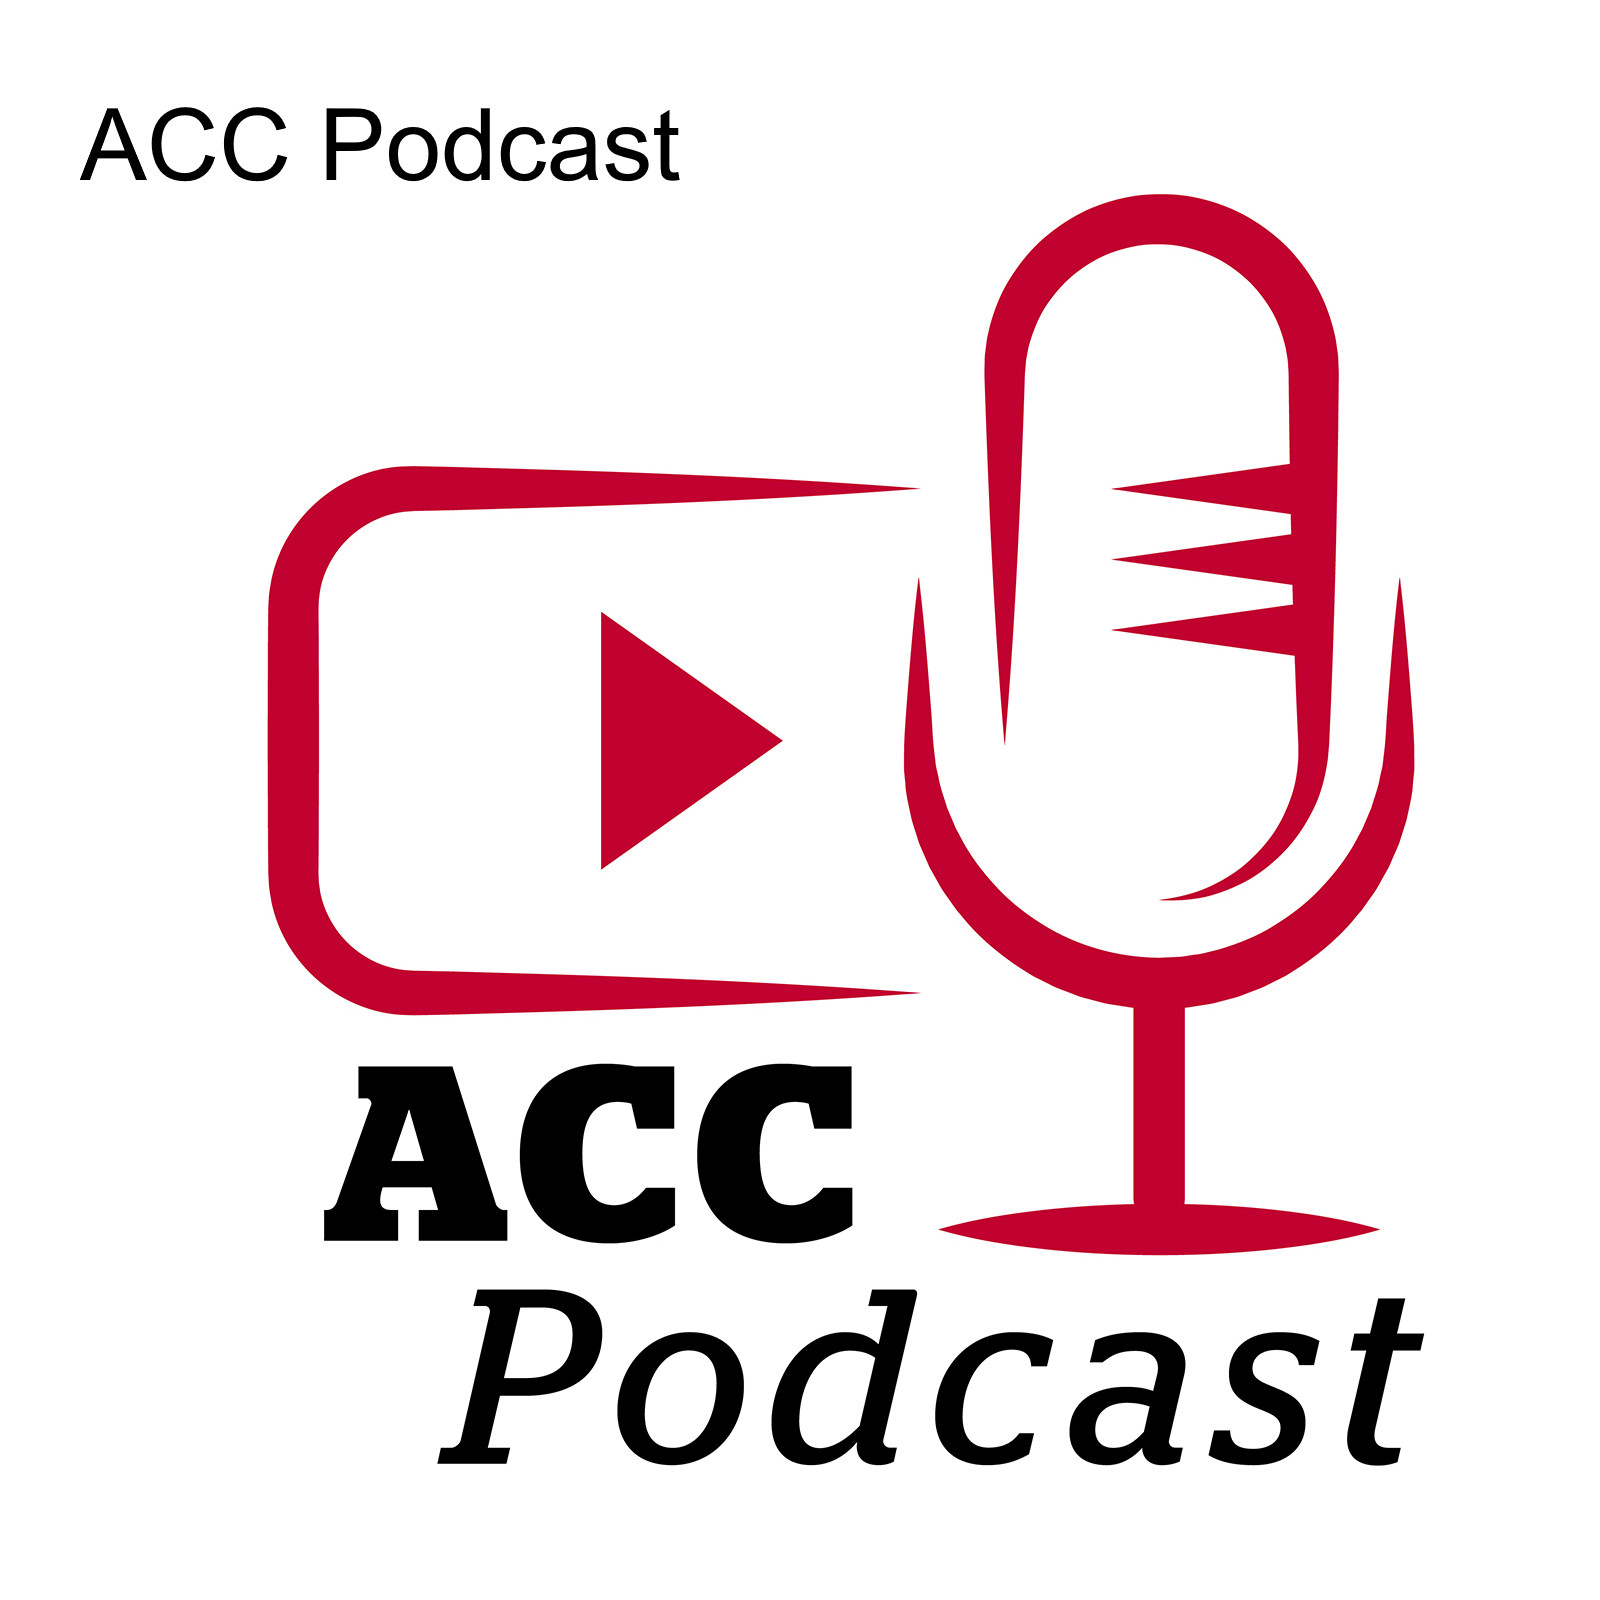 ACC Podcast